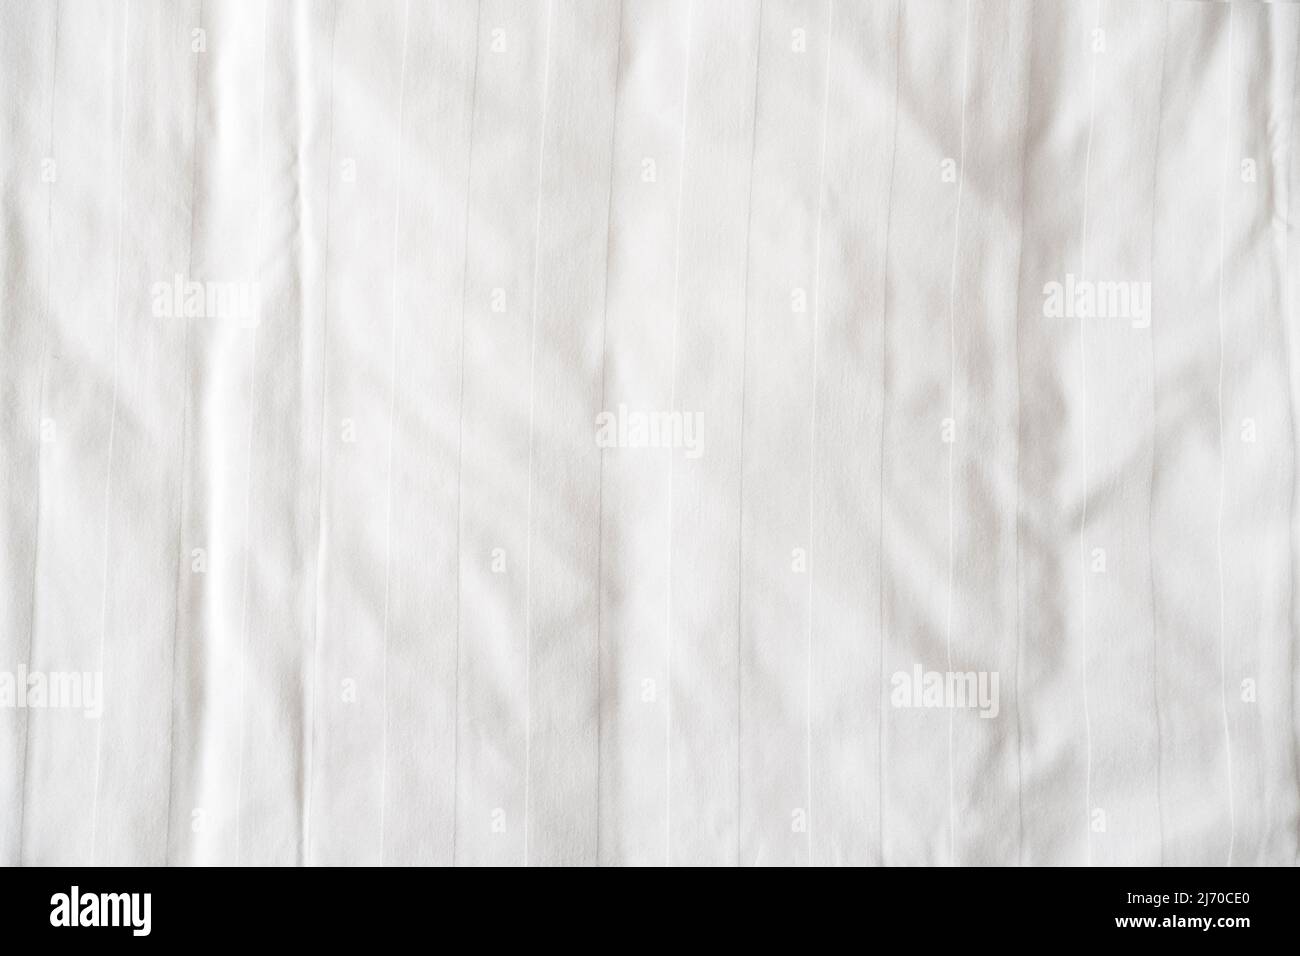 White bed linen, sheet as texture or background, crumpled blank bedclothes top view Stock Photo